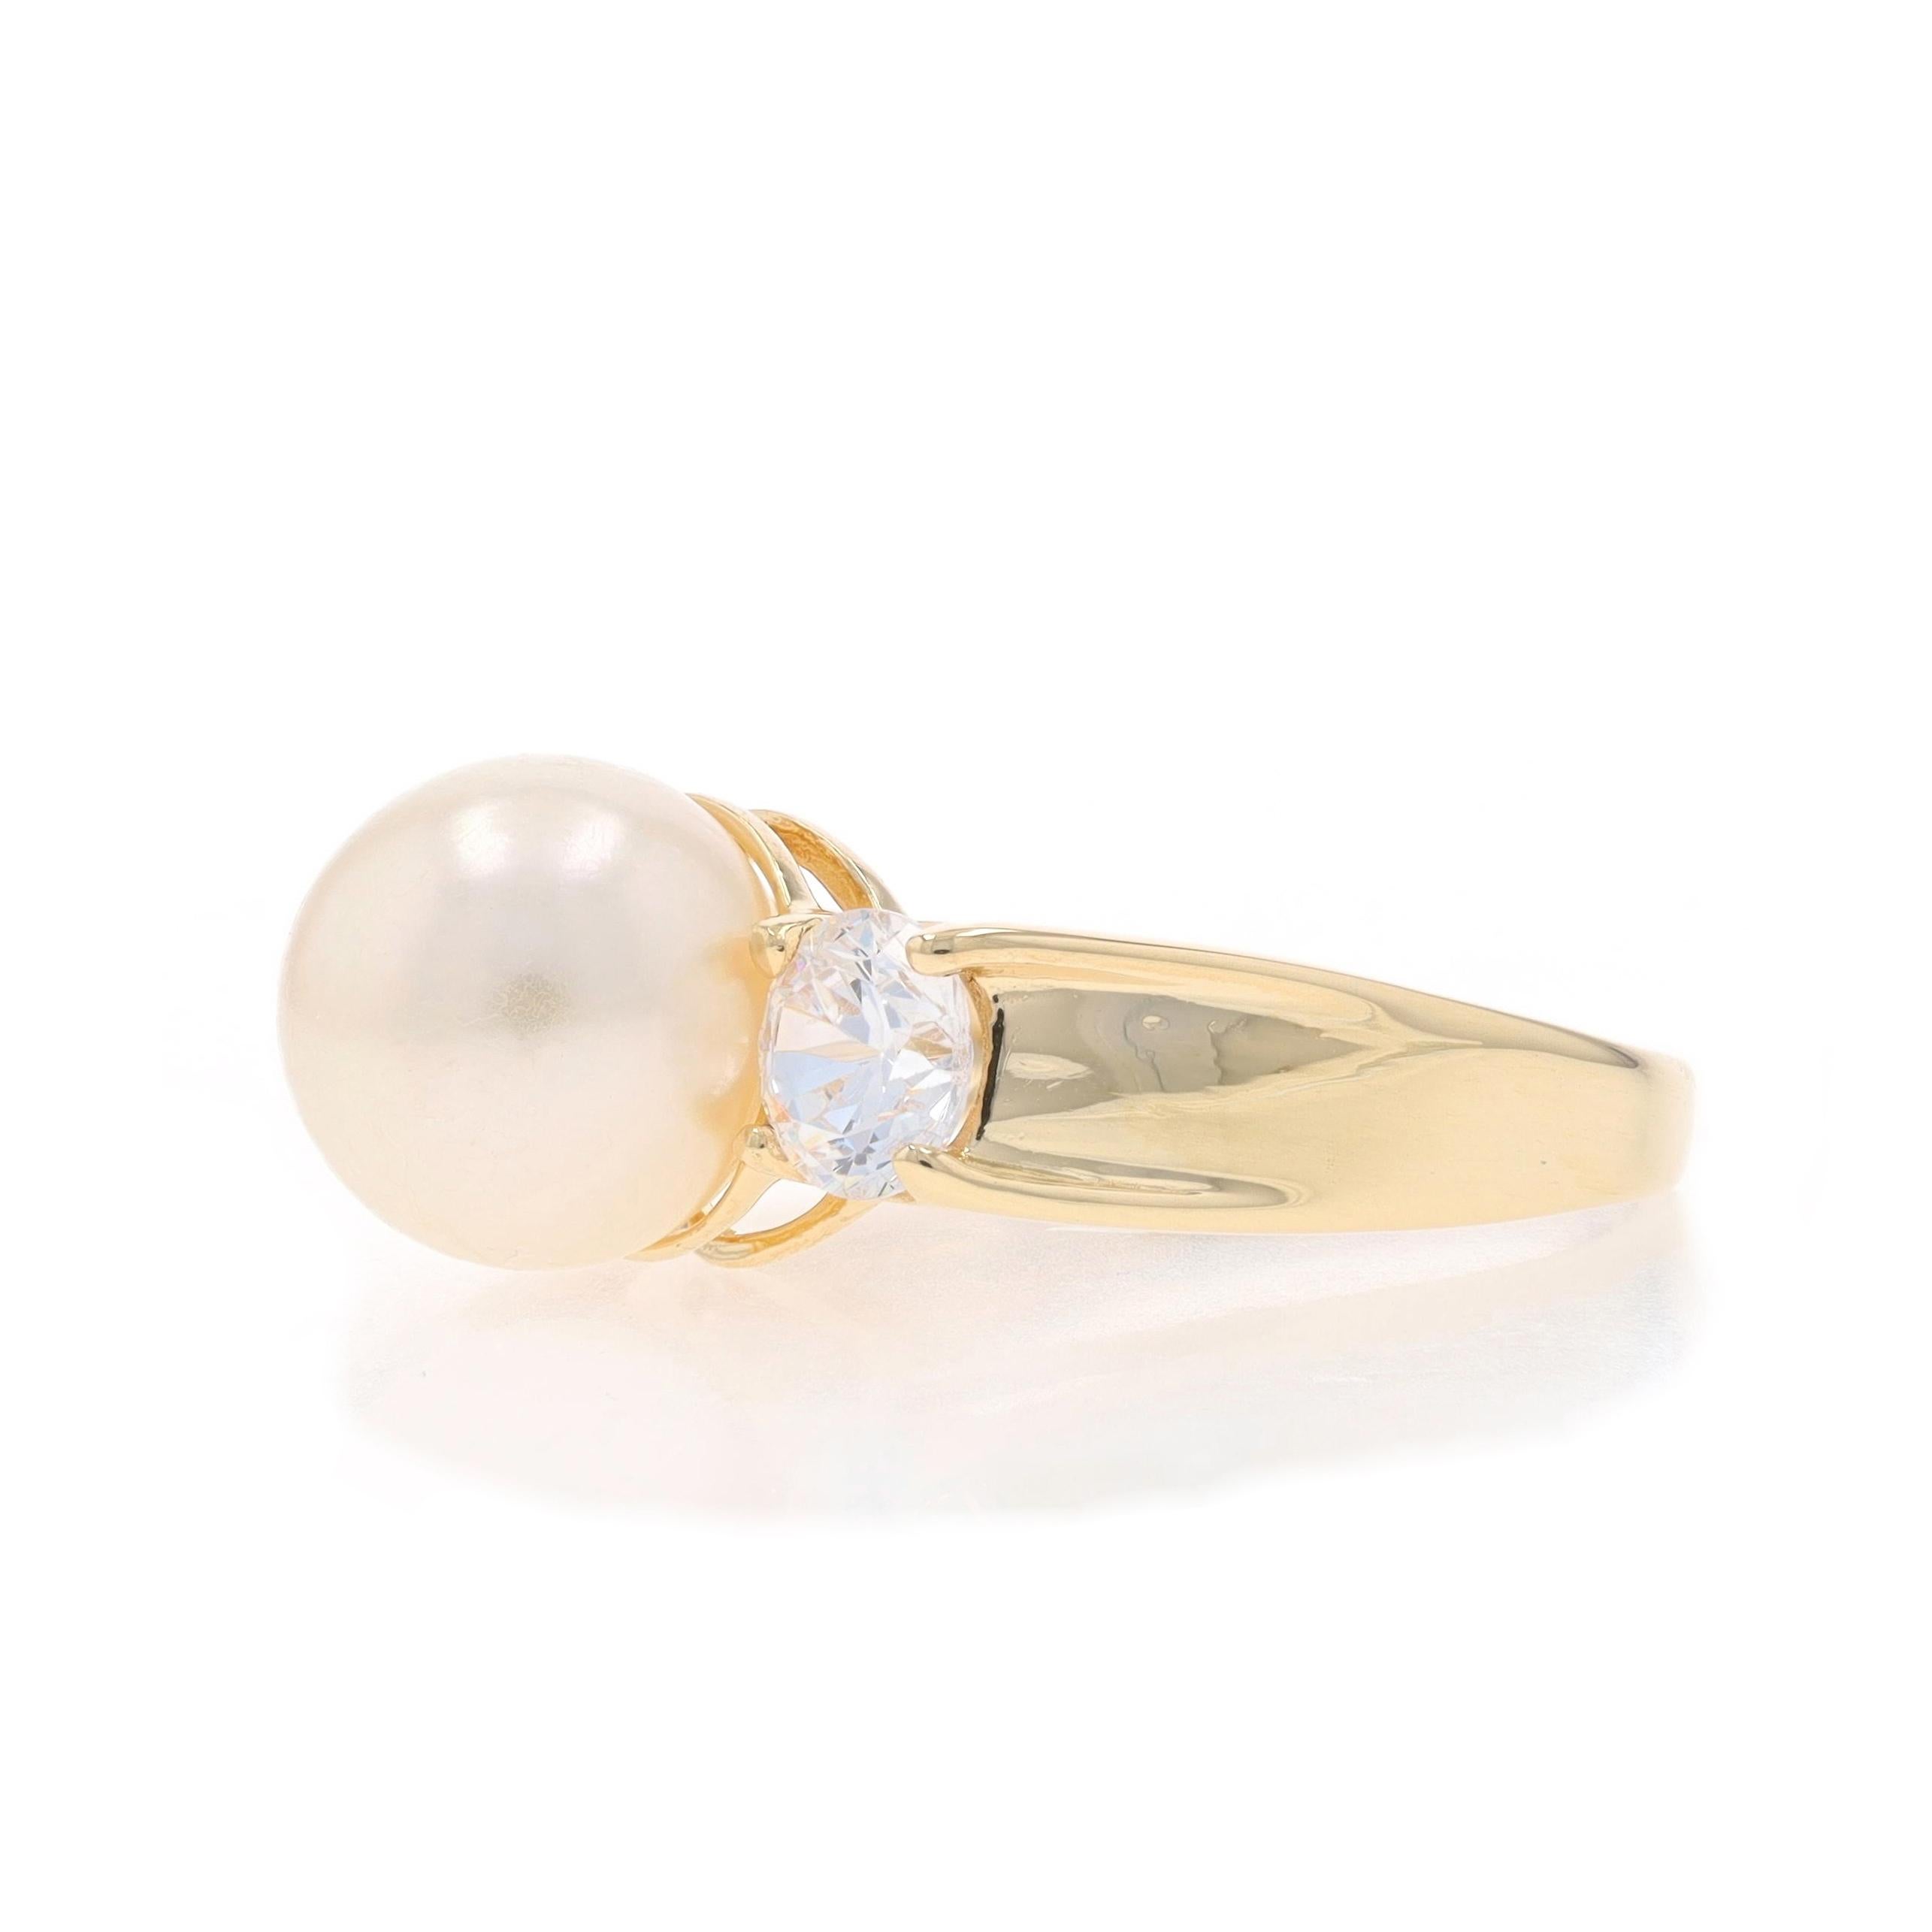 Yellow Gold Cultured Pearl & Cubic Zirconia Ring - 14k 1.00ctw In Excellent Condition For Sale In Greensboro, NC